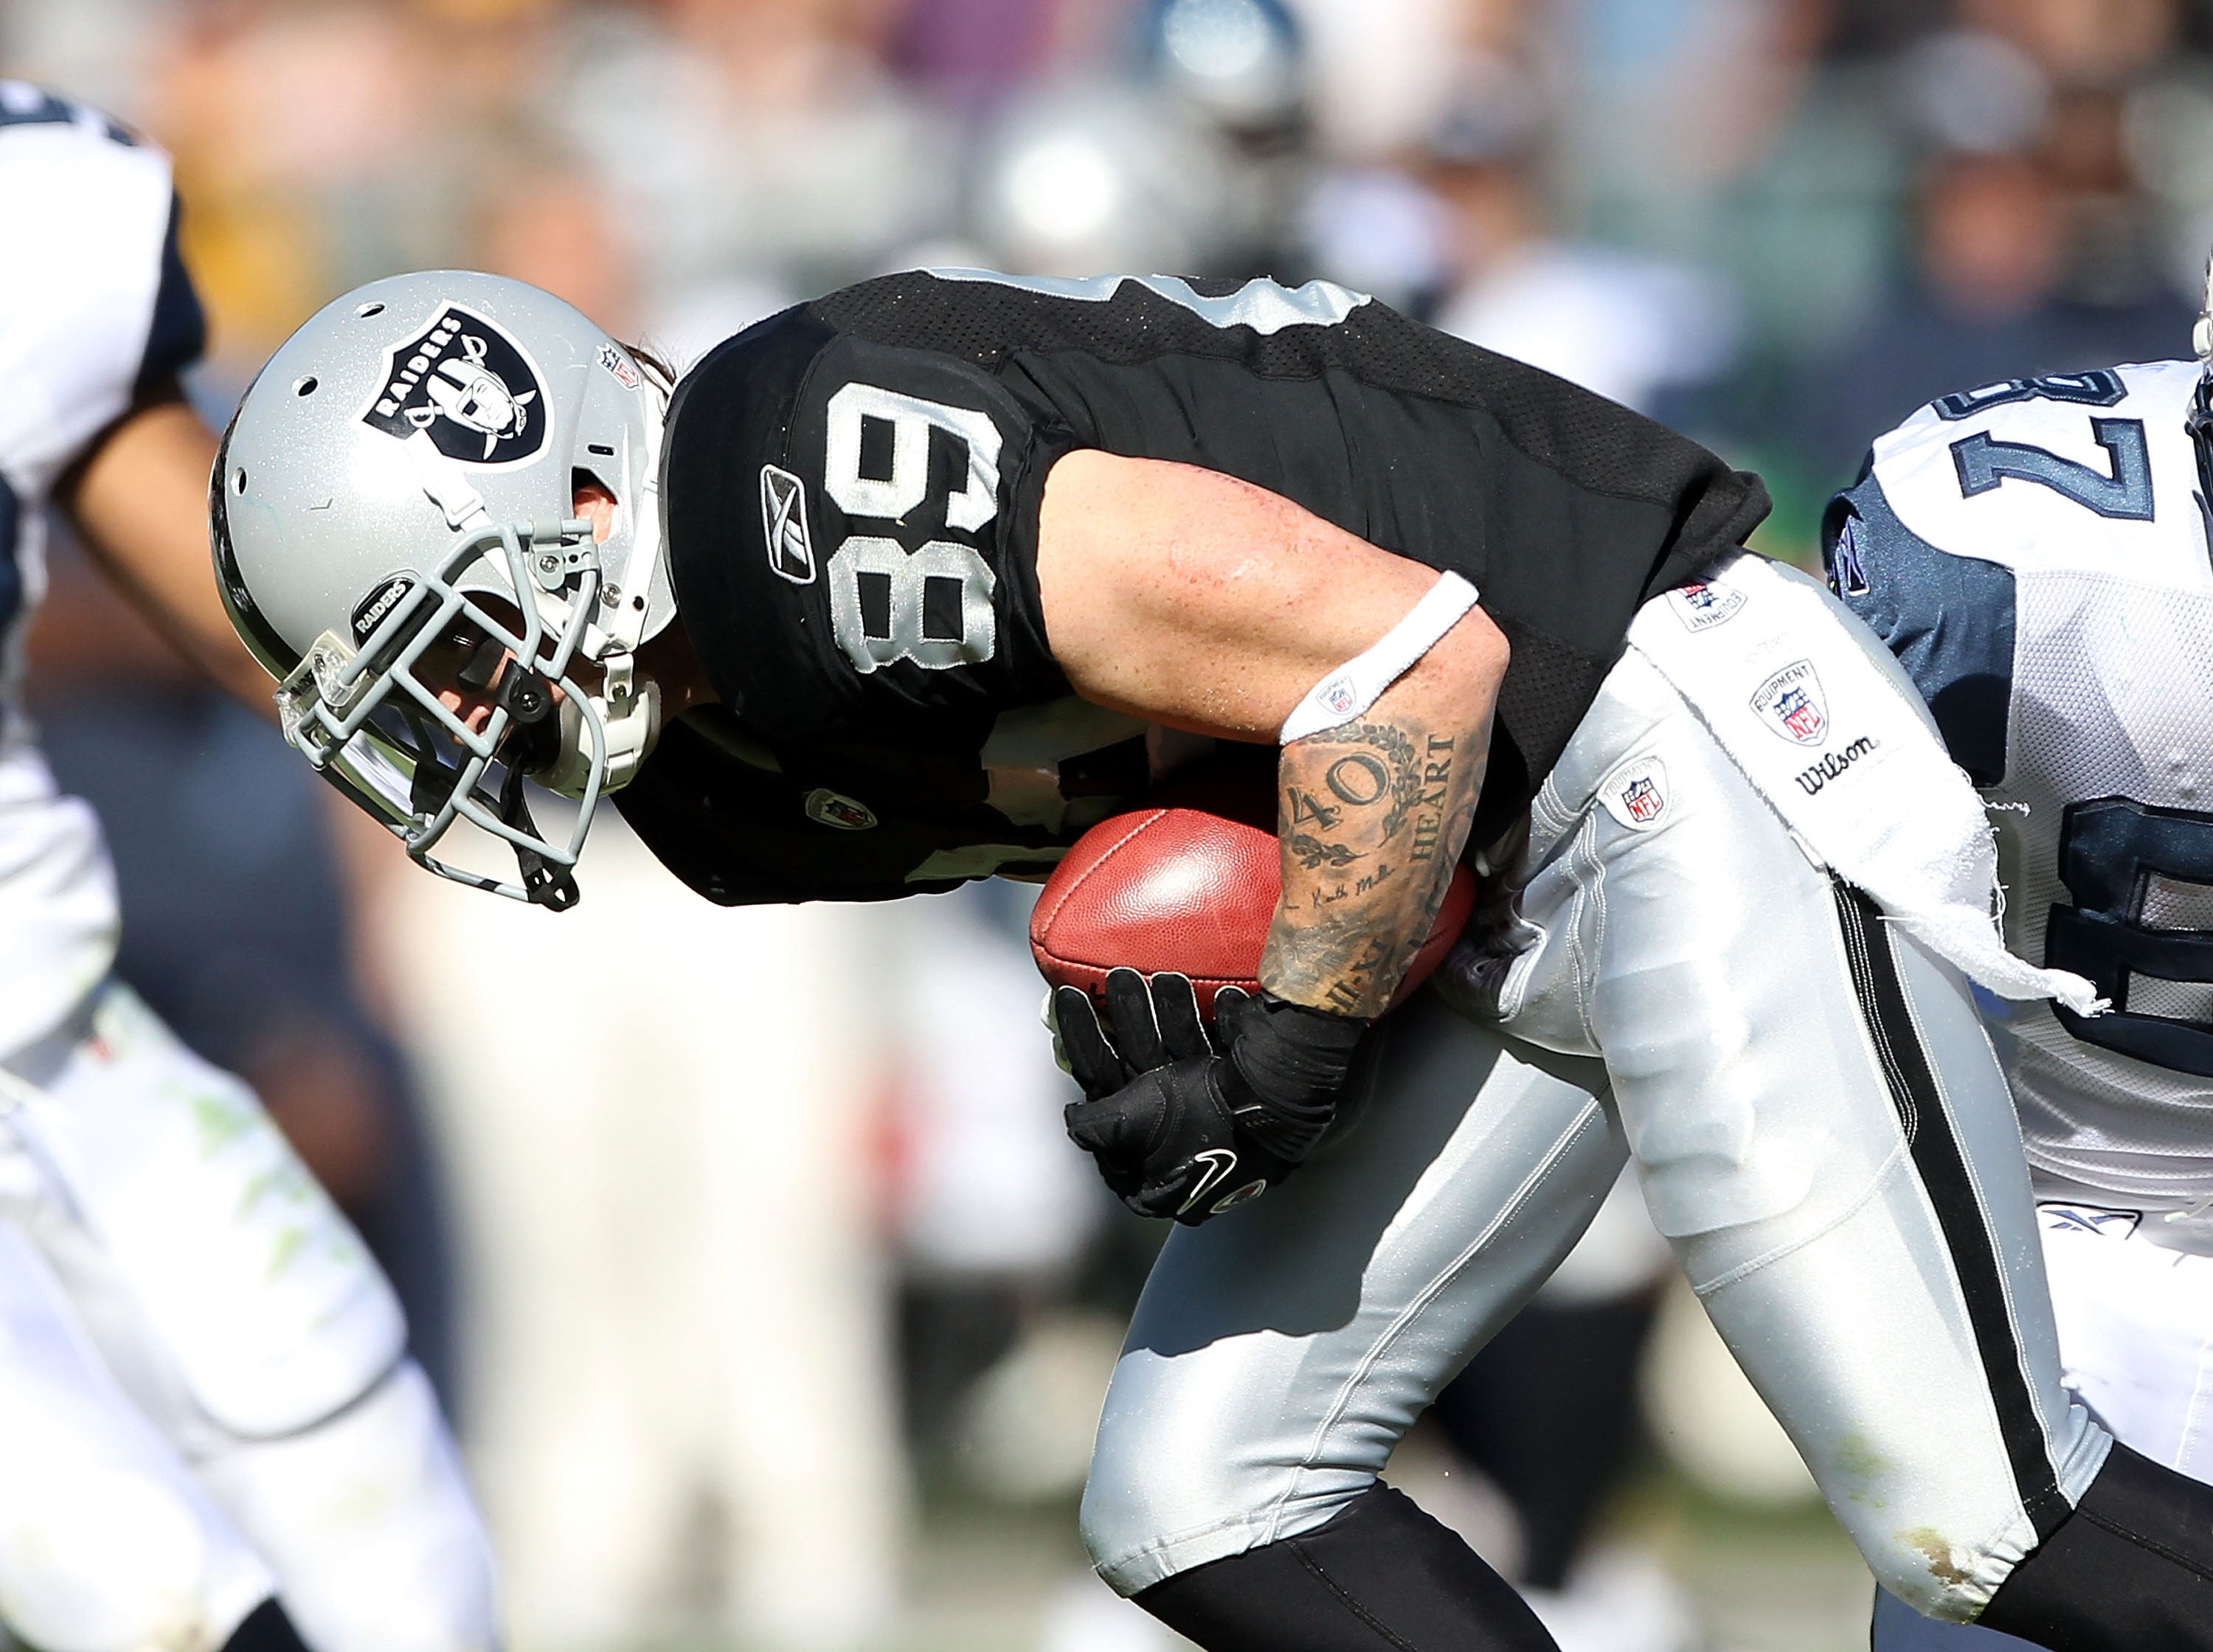 OAKLAND, CA - OCTOBER 31:  Nick Miller #89 of the Oakland Raiders in action against the Seattle Seahawks at Oakland-Alameda County Coliseum on October 31, 2010 in Oakland, California.  (Photo by Ezra Shaw/Getty Images)